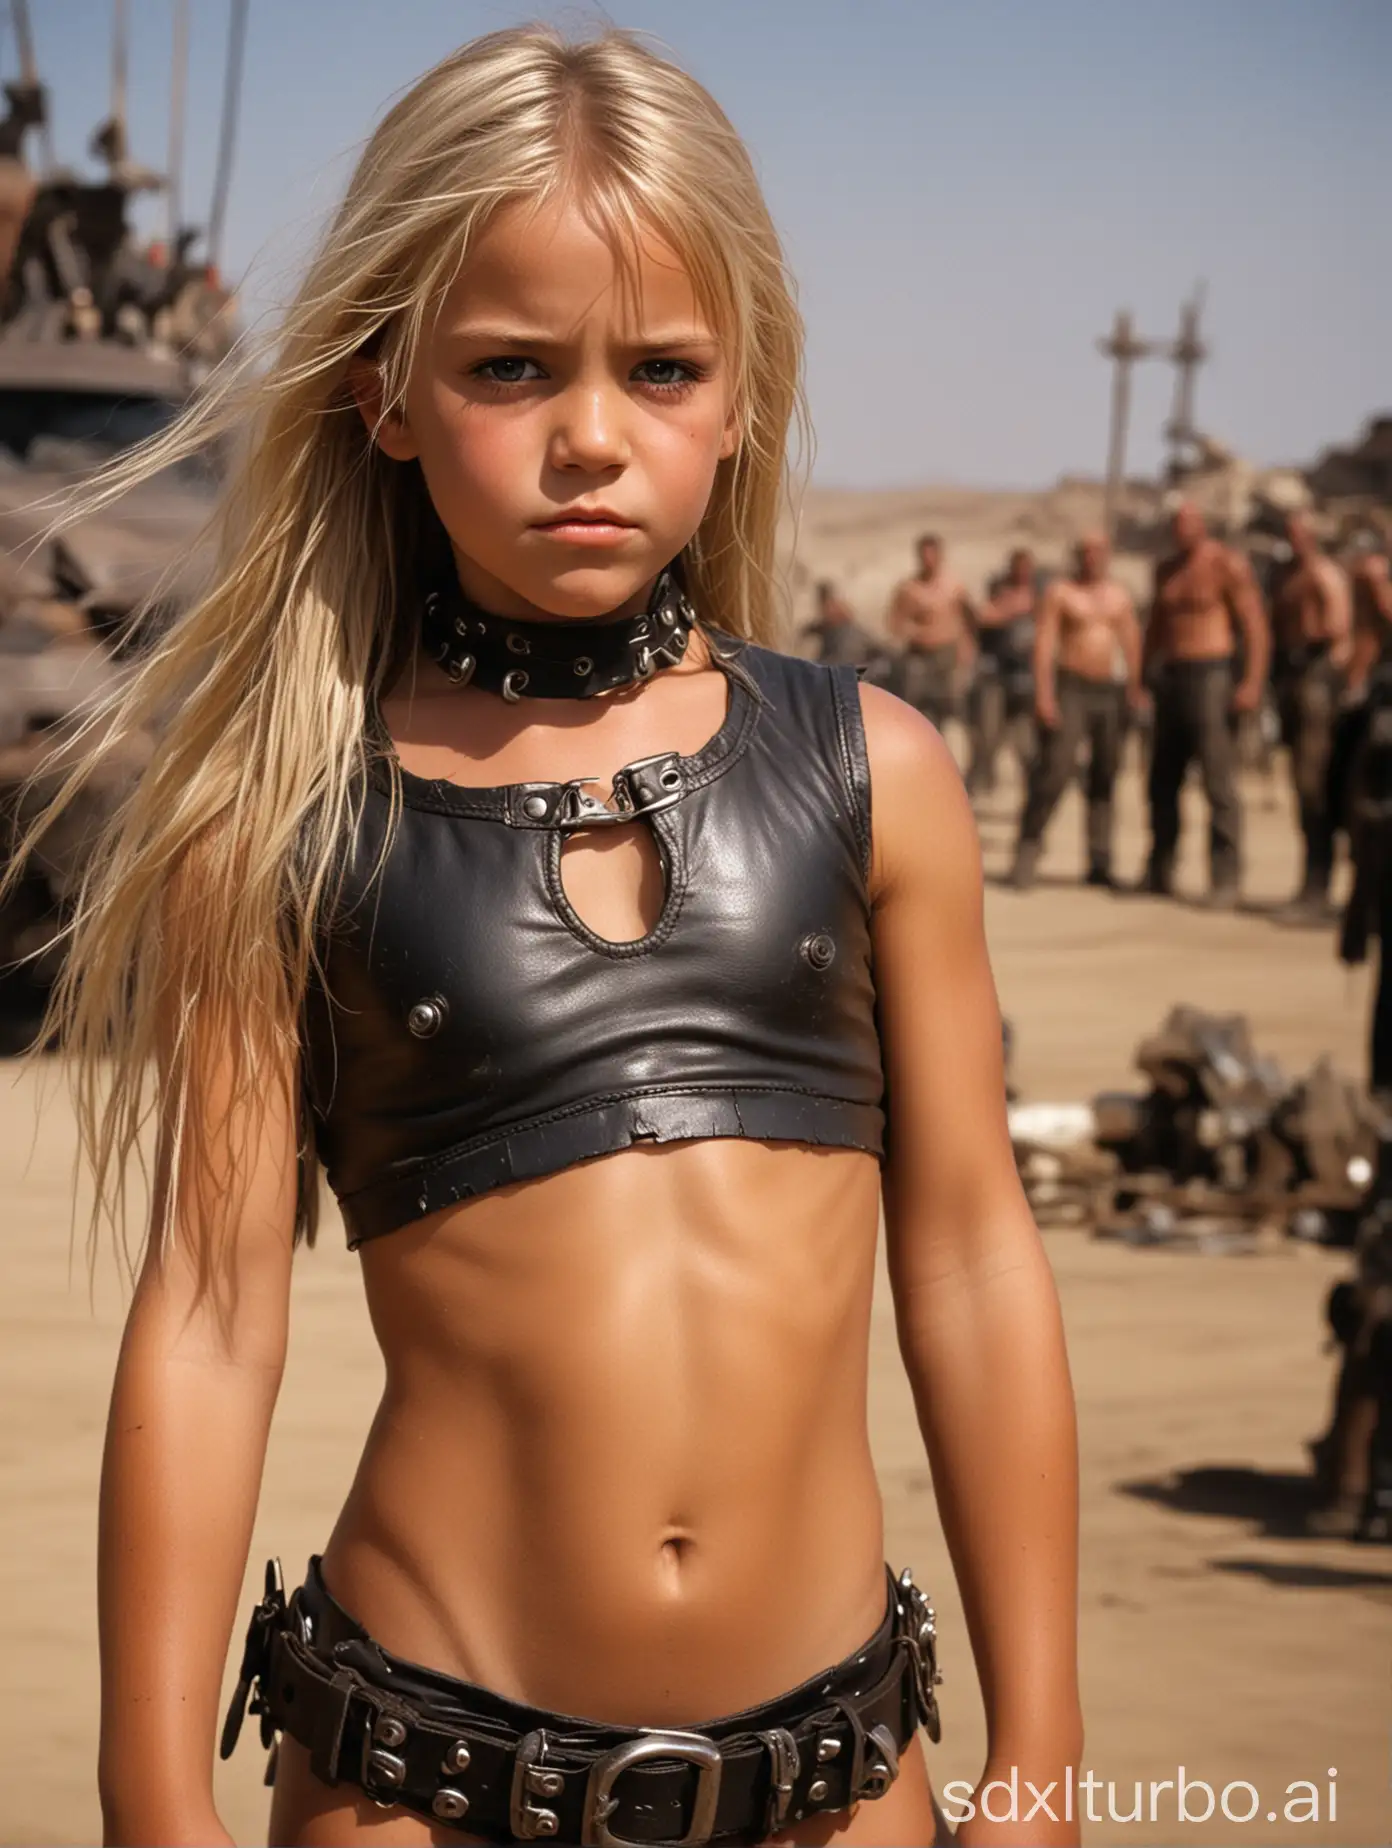 8 year old girl, leather bikini, choker, long blond hair, extremely muscular abs, in Mad Max Beyond Thunderdome, tanned skin